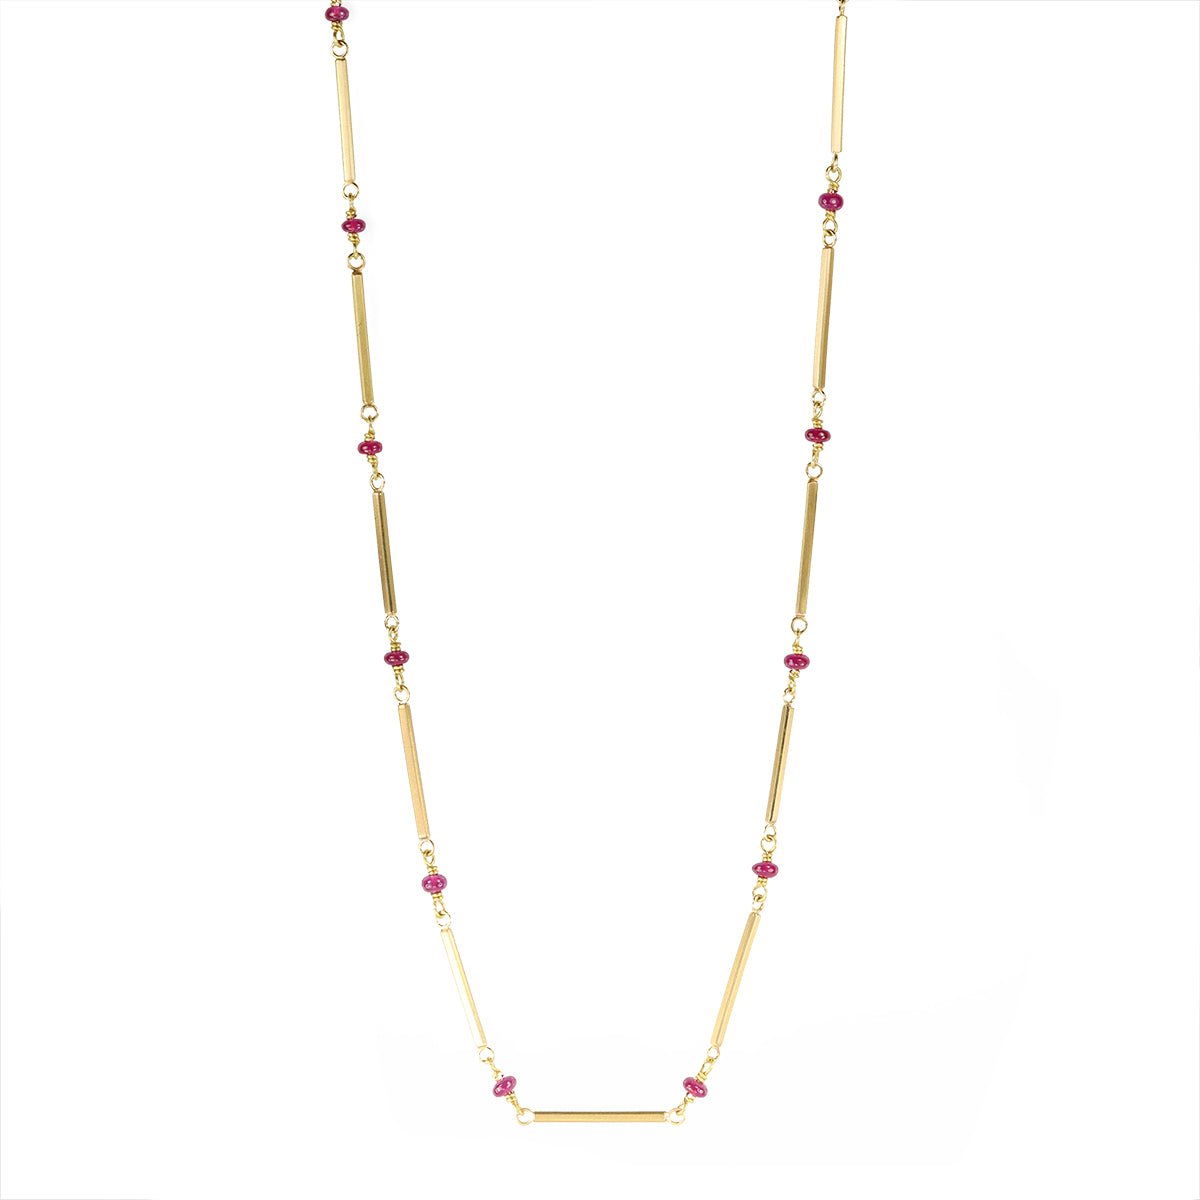 Caroline Ellen 20K Gold Bar Chain Necklace with Cabochon Ruby Beads